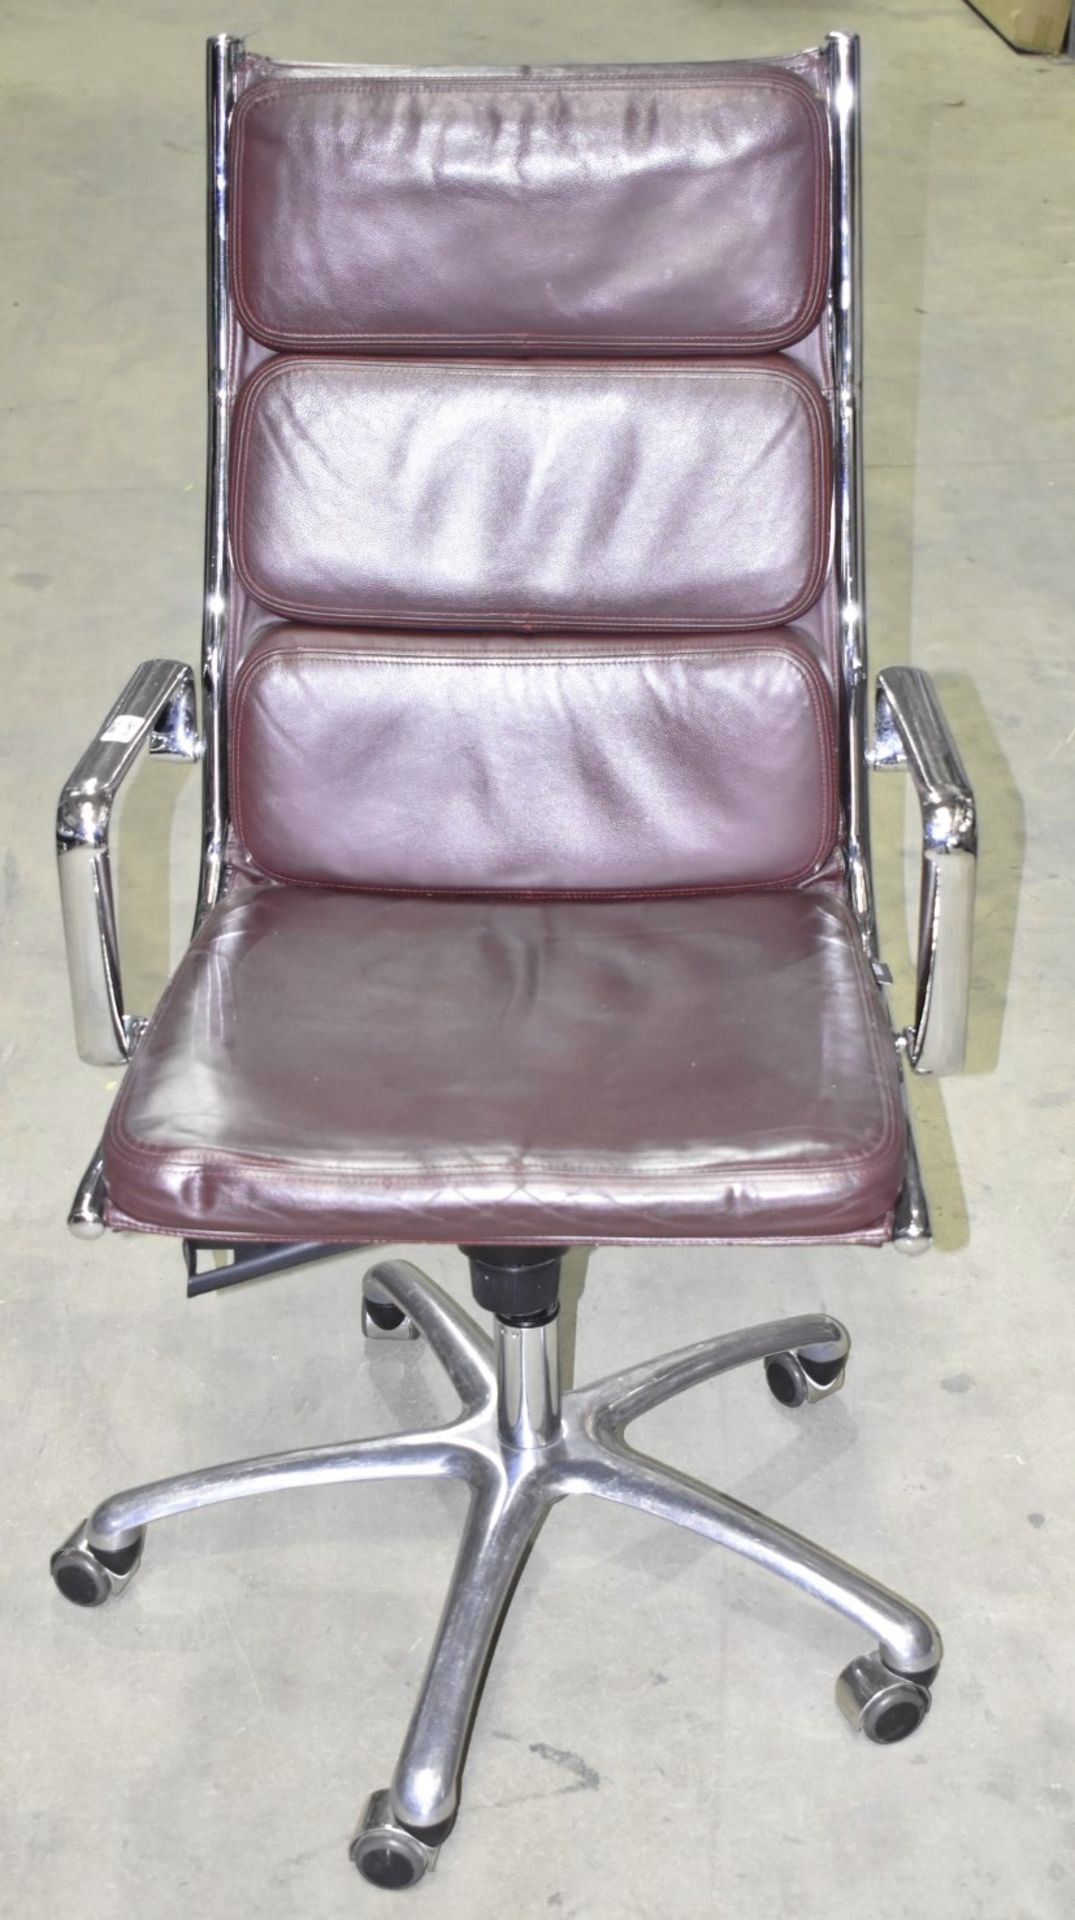 1 x LUXY Leather Upholstered Soft Pad Office Swivel Chair, Dark Brown - RRP £1,600 - Image 8 of 8